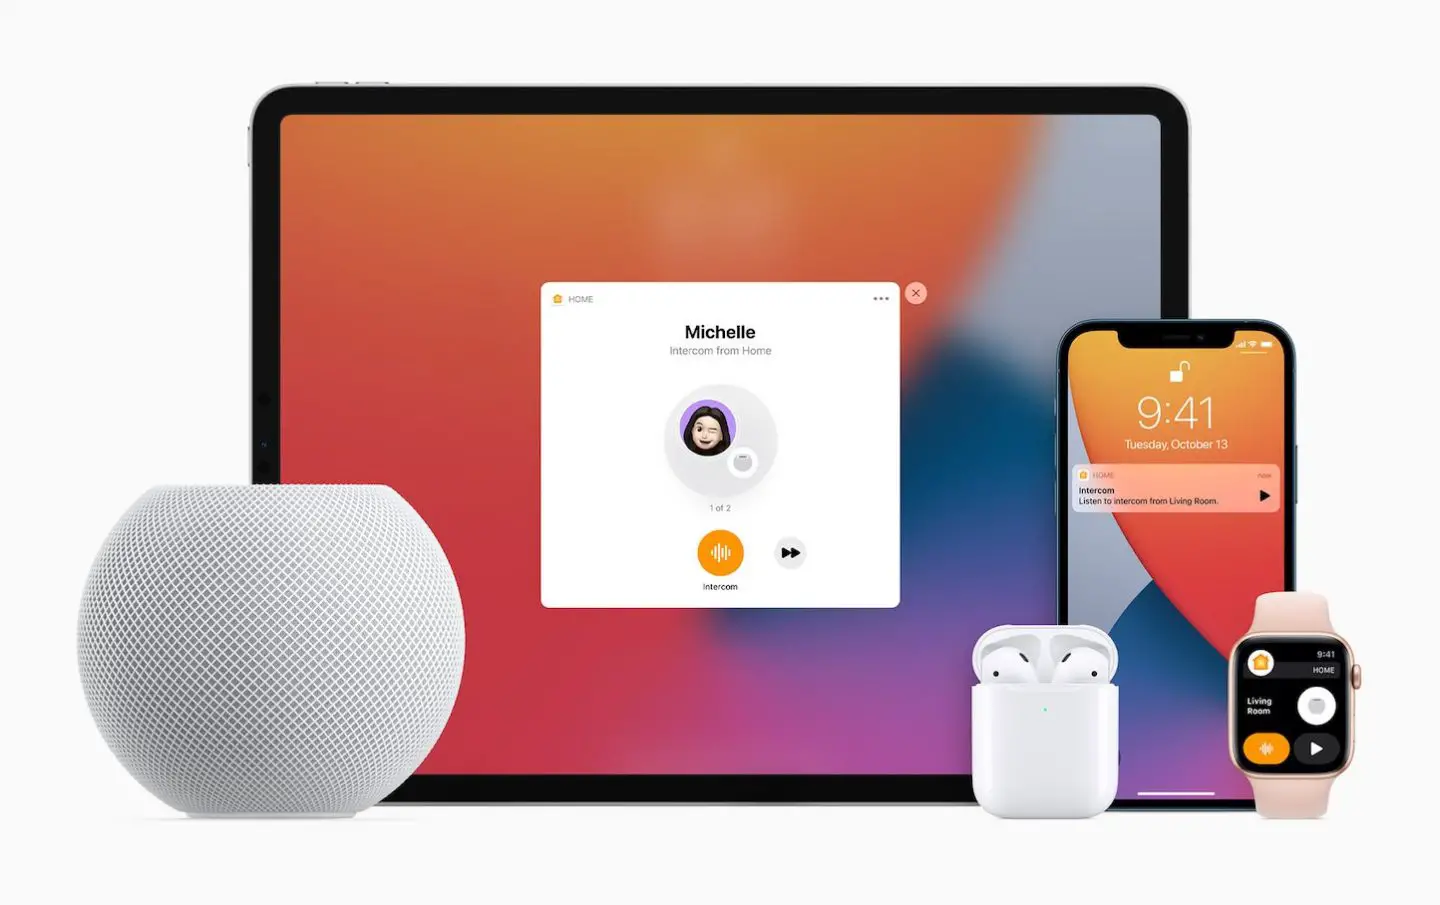 How-to Hard Reset HomePod in 2023?